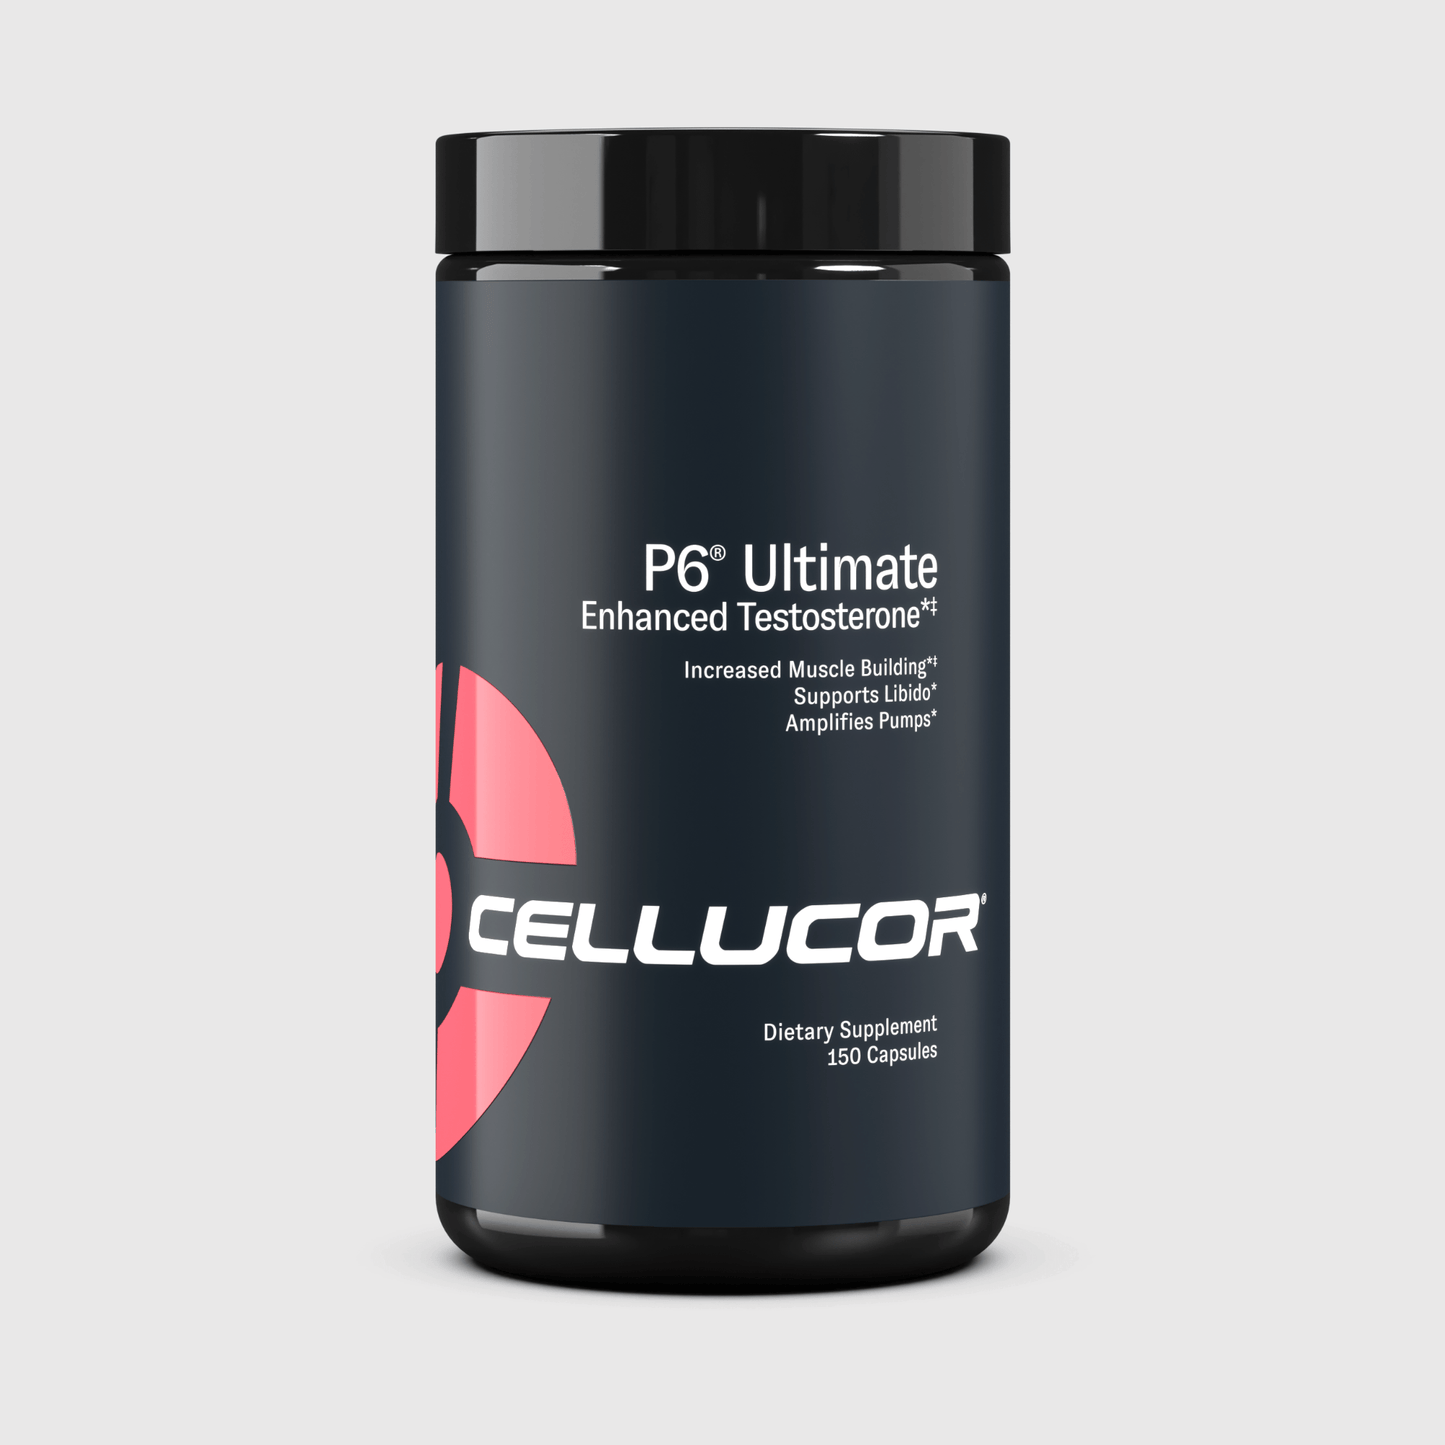 P6® Ultimate Testosterone Booster